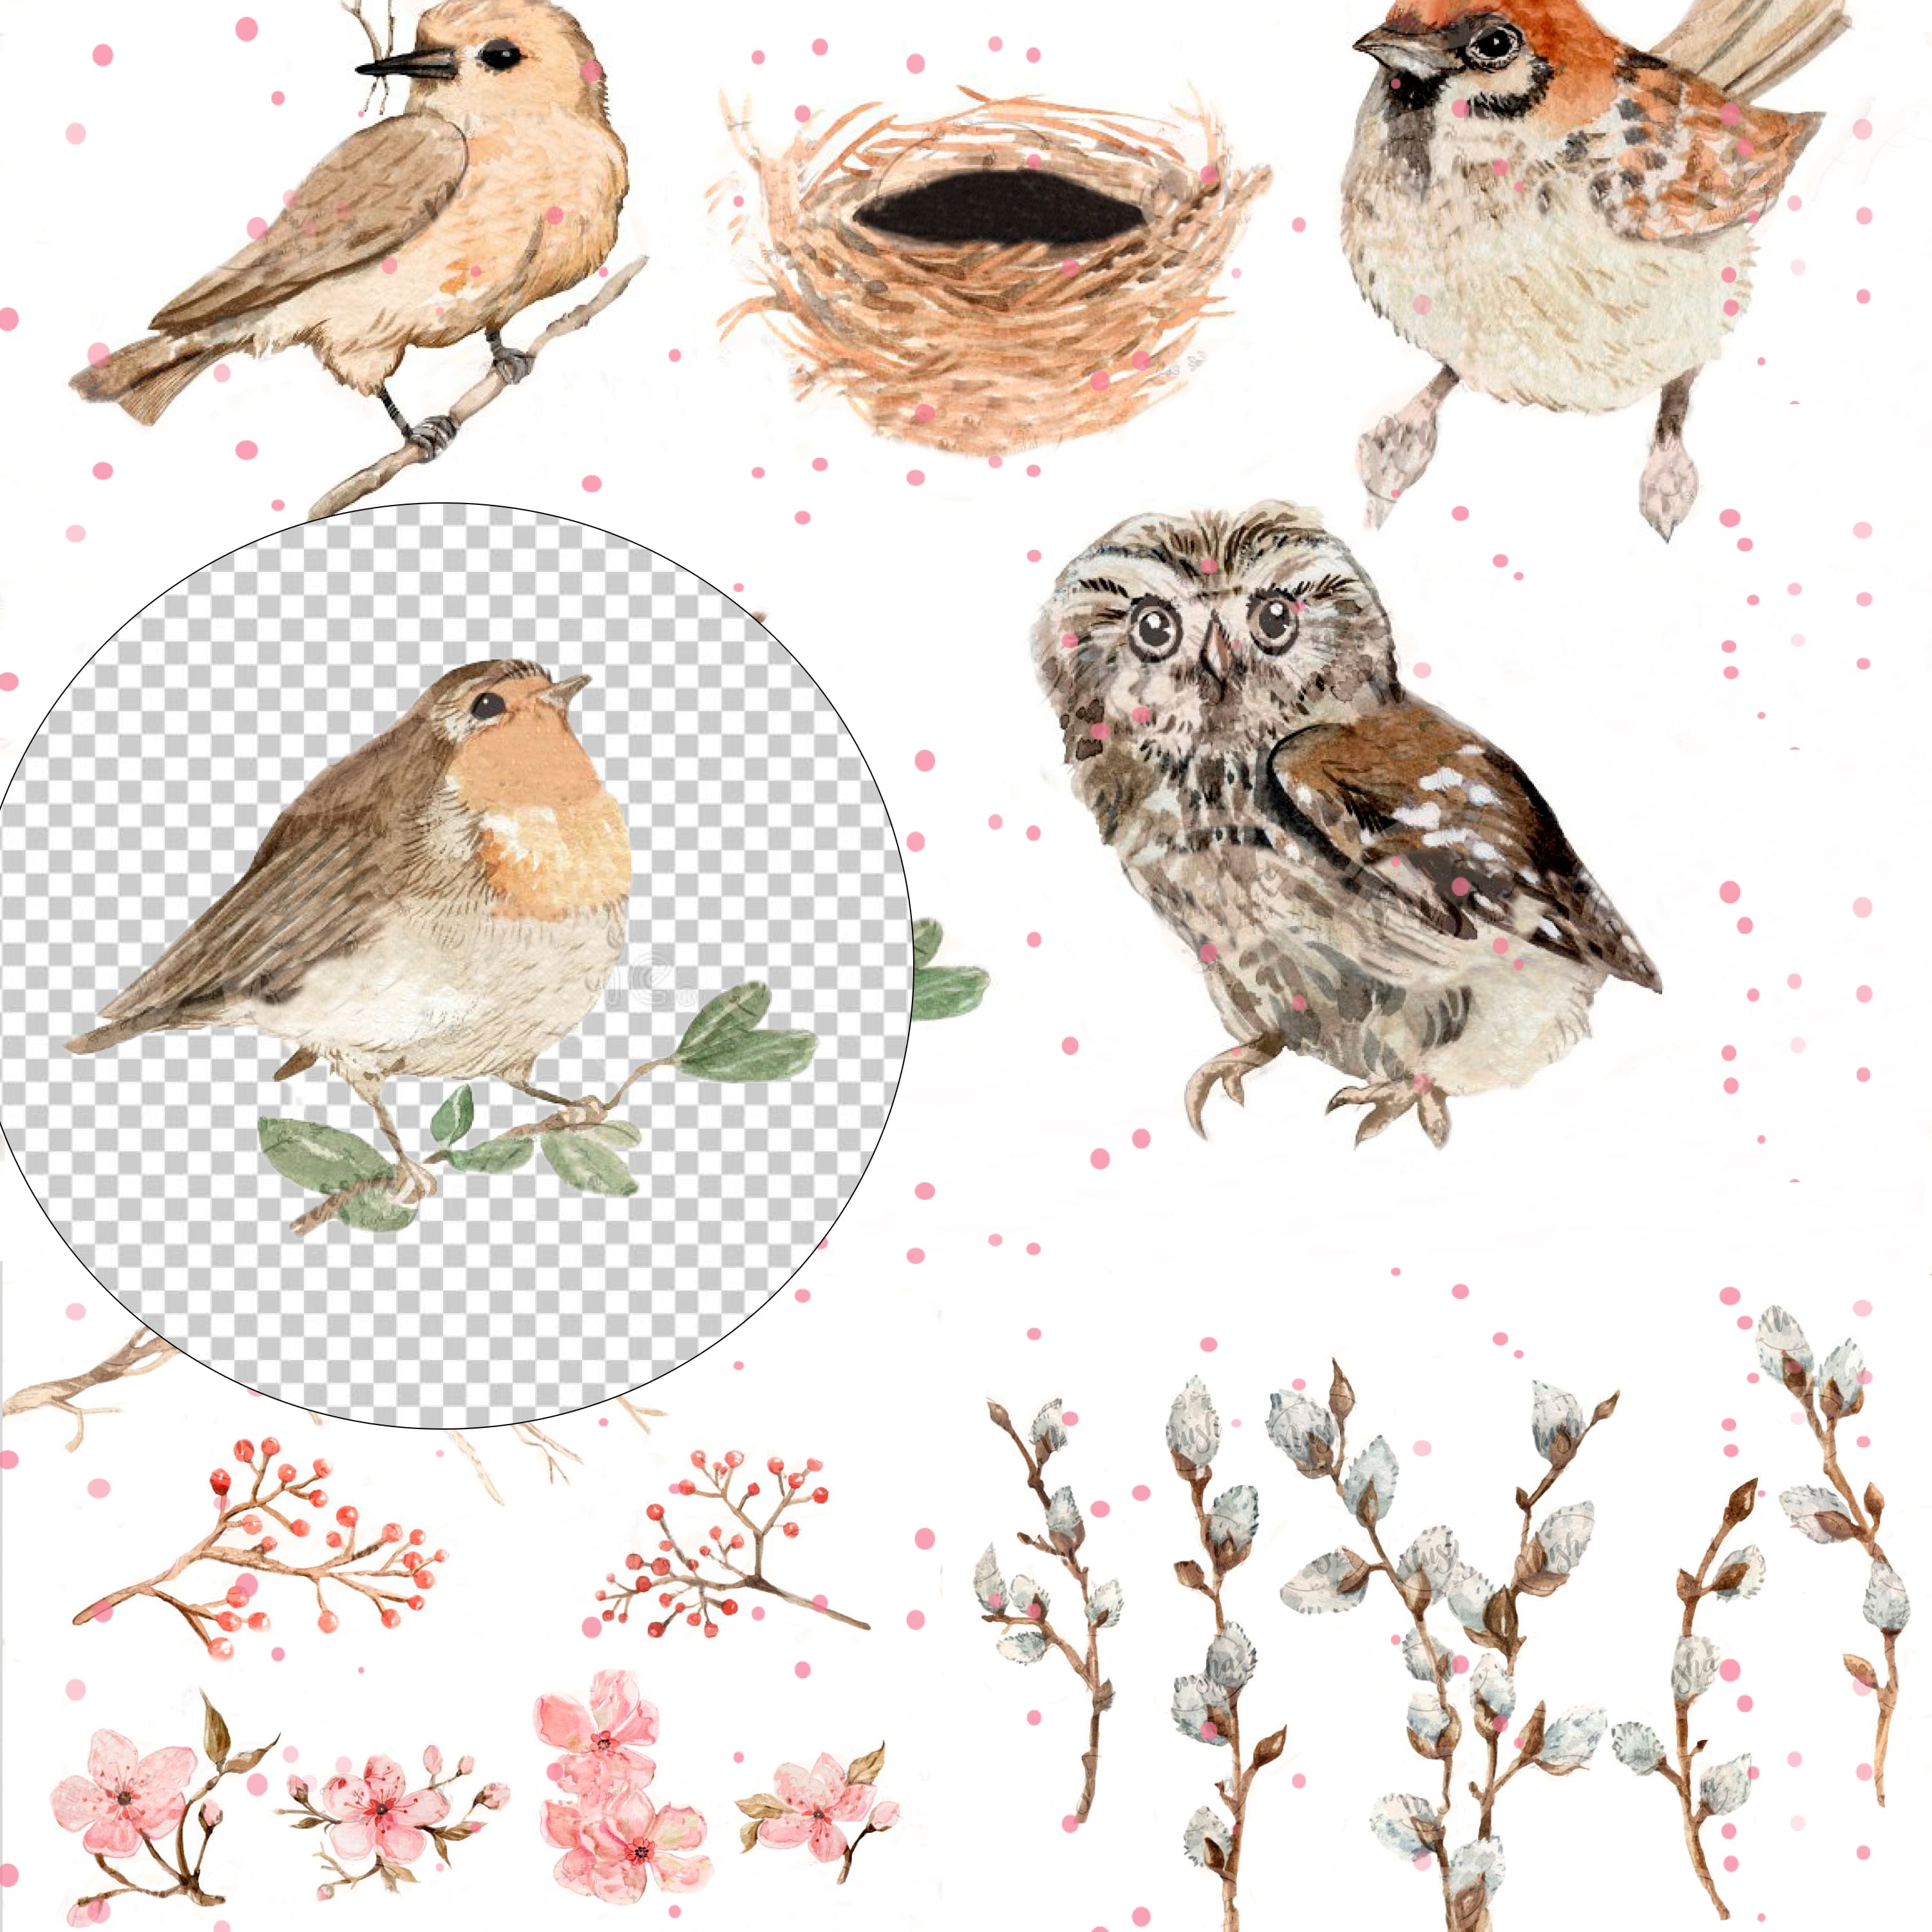 Pretty birds and spring flowers.